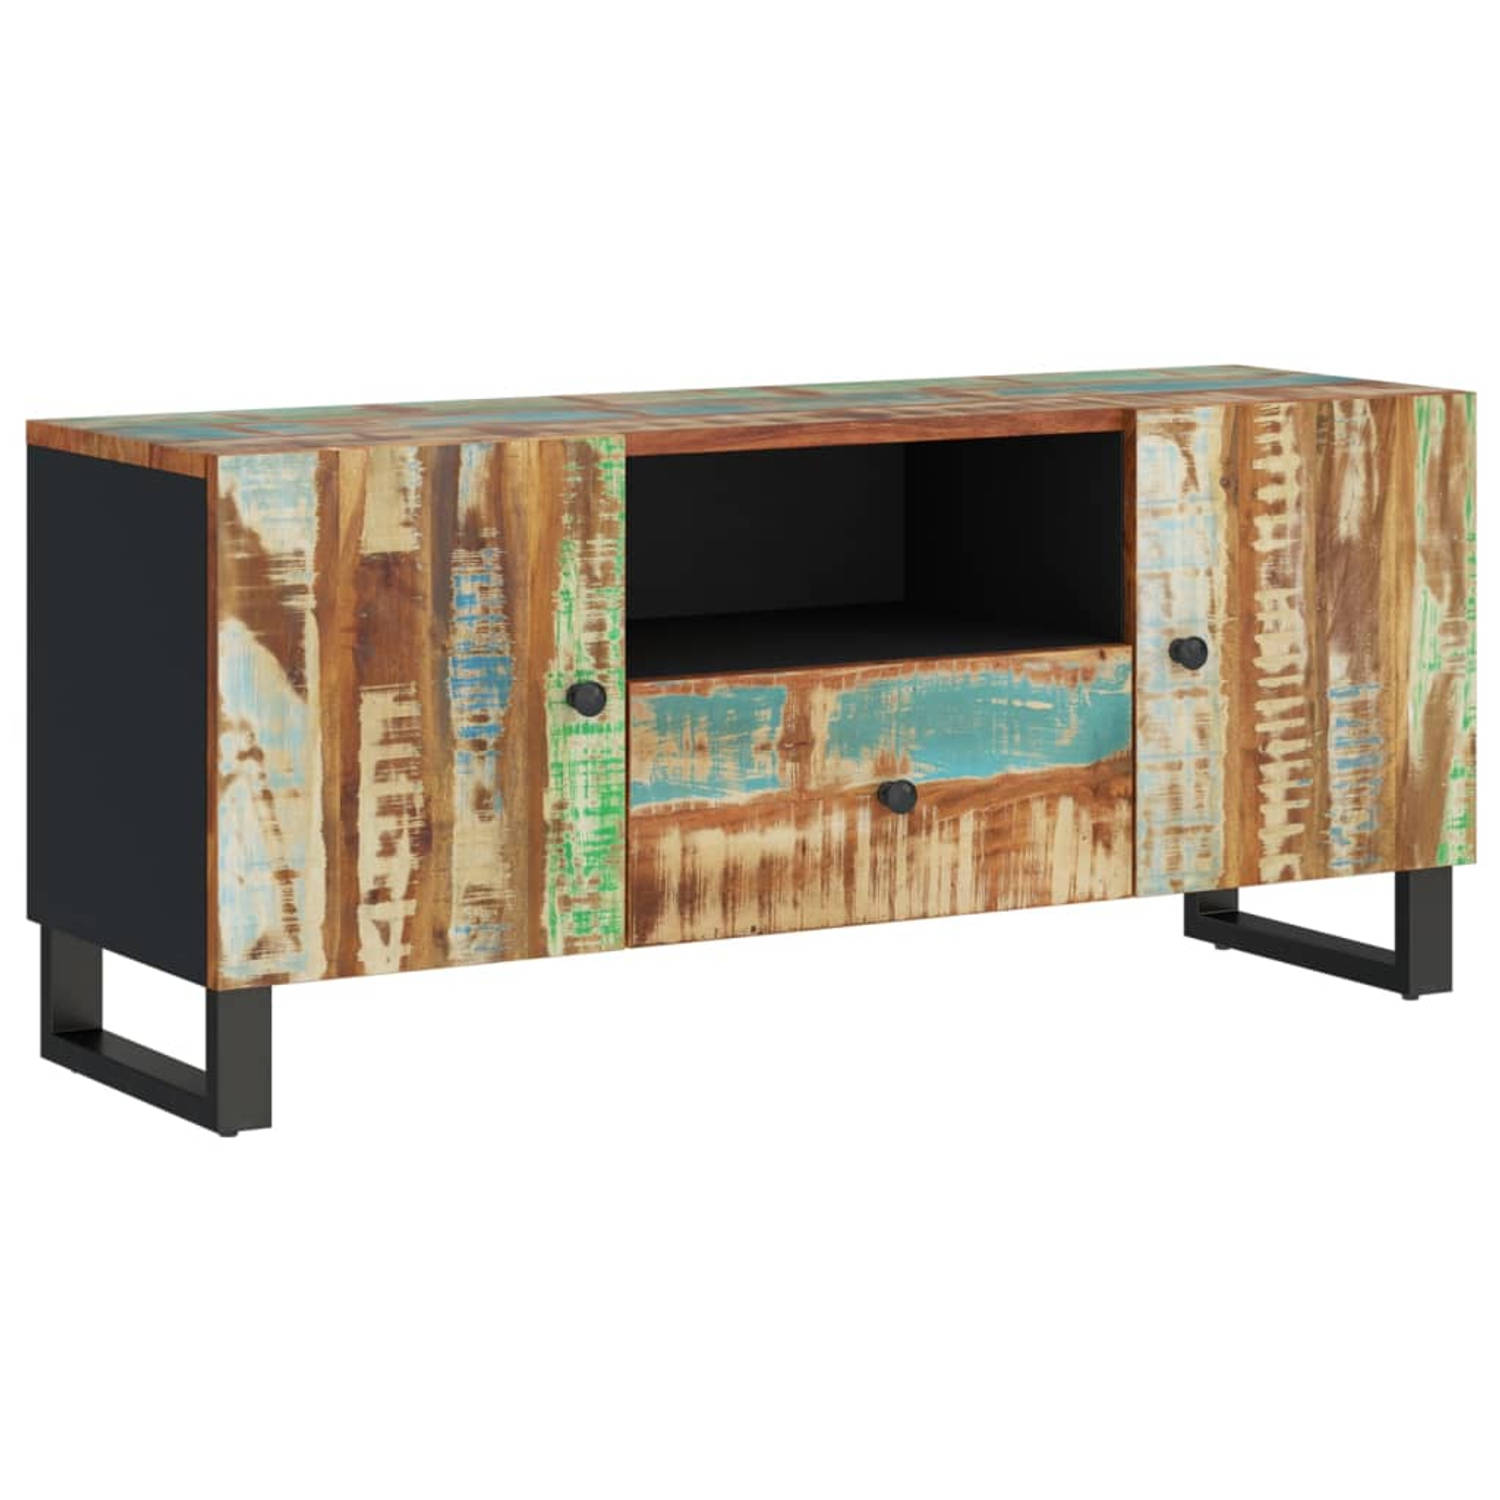 - The Living Store TV-meubel - Serie [NAAM] - TV-meubel - 105x33.5x46cm - Massief gerecycled hout